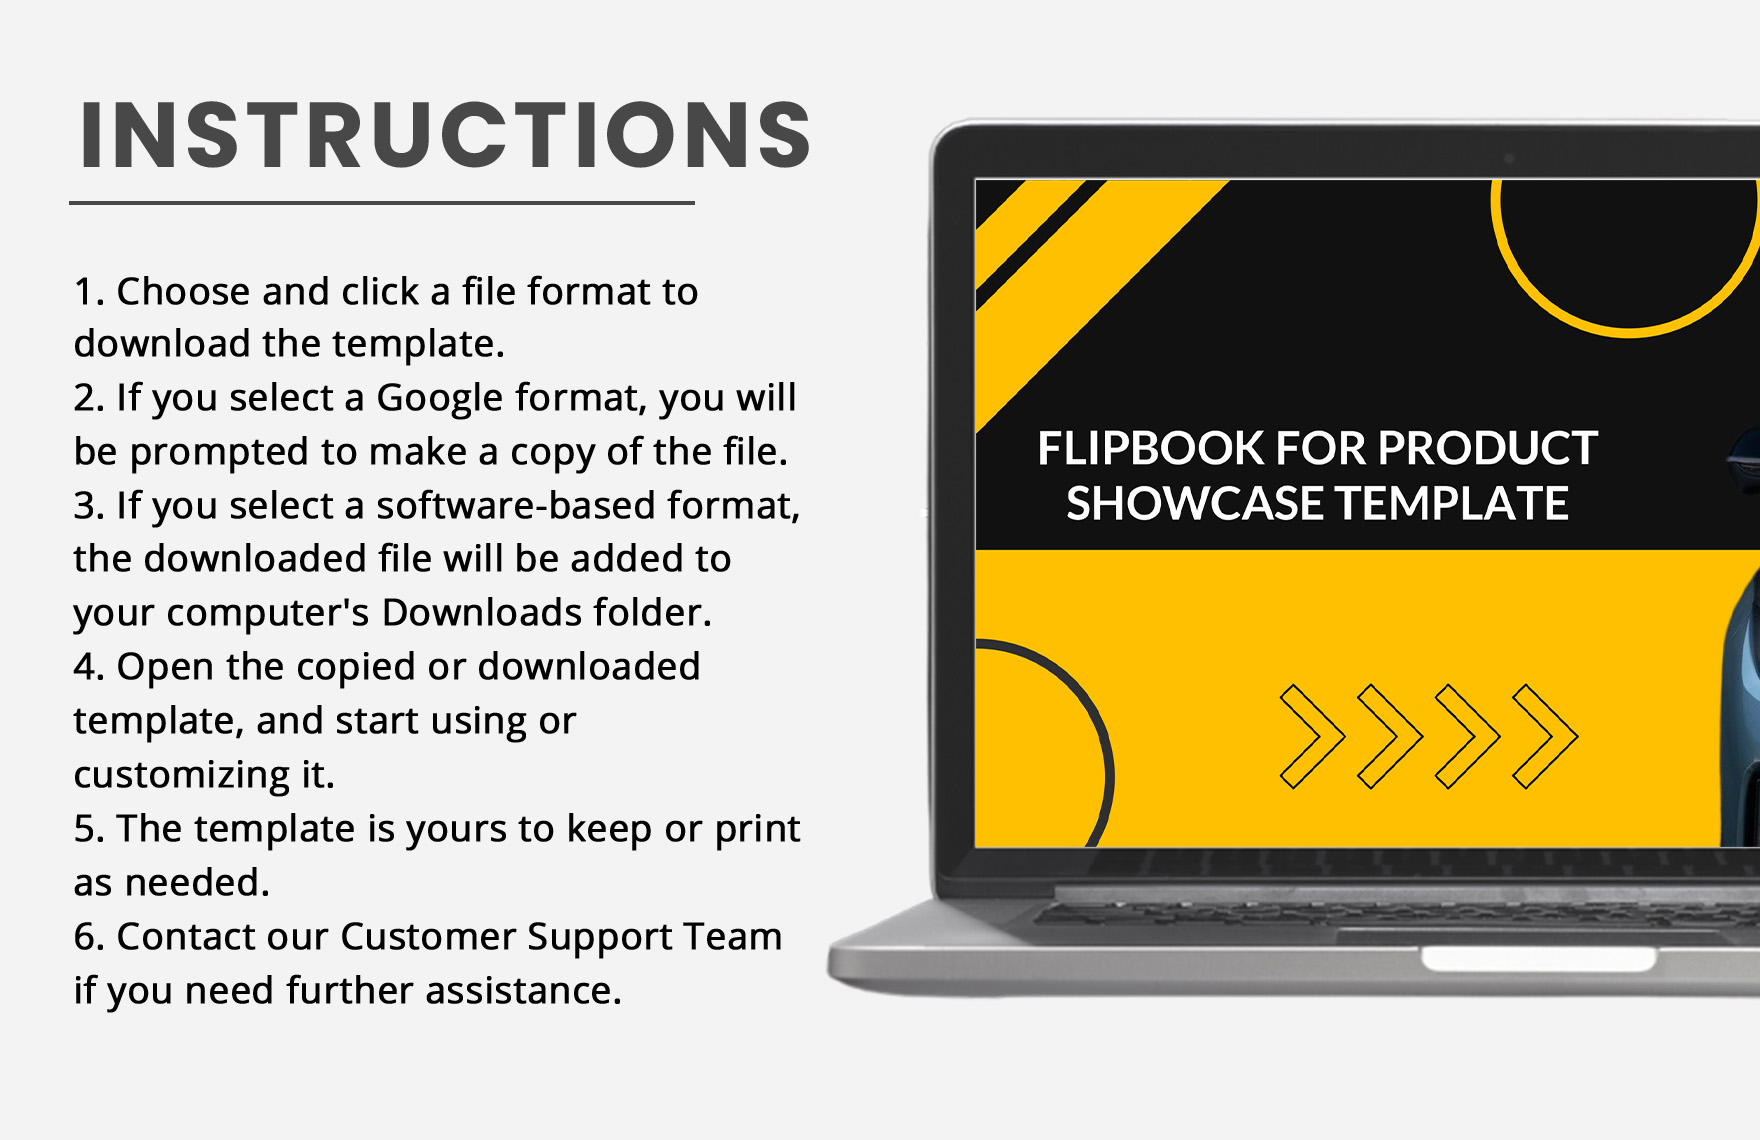 Flipbook Presentation for Product Showcase Template